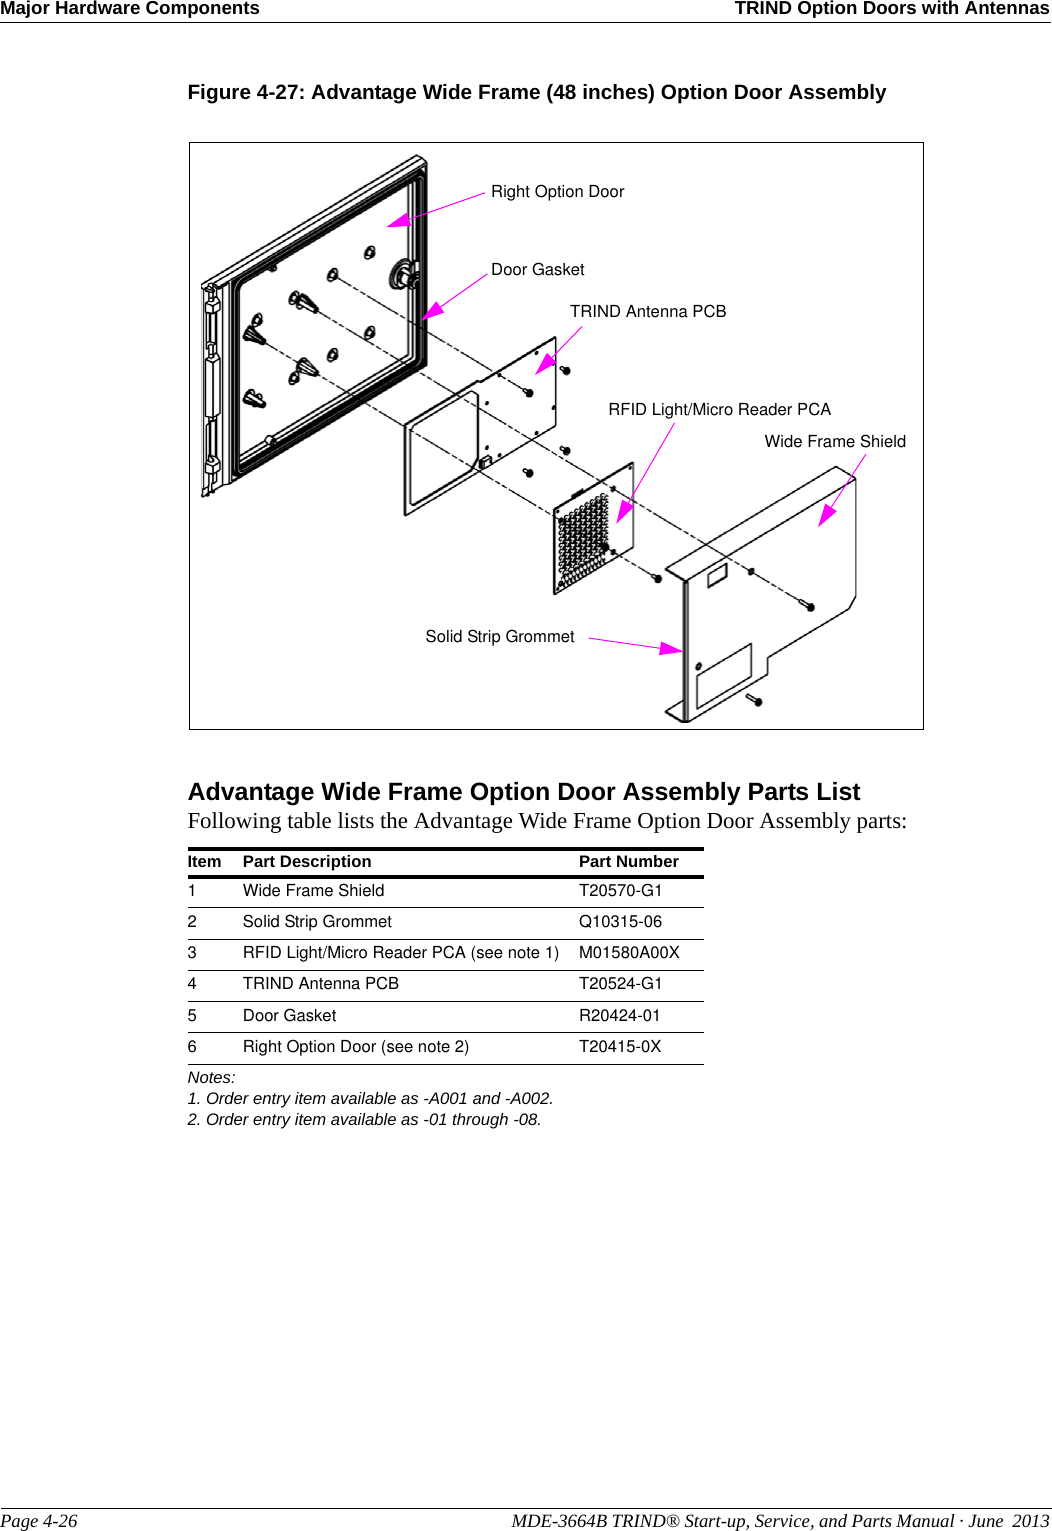 Major Hardware Components TRIND Option Doors with AntennasPage 4-26                                                                                                  MDE-3664B TRIND® Start-up, Service, and Parts Manual · June  2013Figure 4-27: Advantage Wide Frame (48 inches) Option Door AssemblyWide Frame ShieldRight Option DoorDoor GasketTRIND Antenna PCBRFID Light/Micro Reader PCASolid Strip GrommetAdvantage Wide Frame Option Door Assembly Parts ListFollowing table lists the Advantage Wide Frame Option Door Assembly parts: Item Part Description Part Number1Wide Frame Shield T20570-G12Solid Strip Grommet Q10315-063RFID Light/Micro Reader PCA (see note 1) M01580A00X4TRIND Antenna PCB T20524-G15Door Gasket R20424-016Right Option Door (see note 2) T20415-0XNotes:1. Order entry item available as -A001 and -A002.2. Order entry item available as -01 through -08.